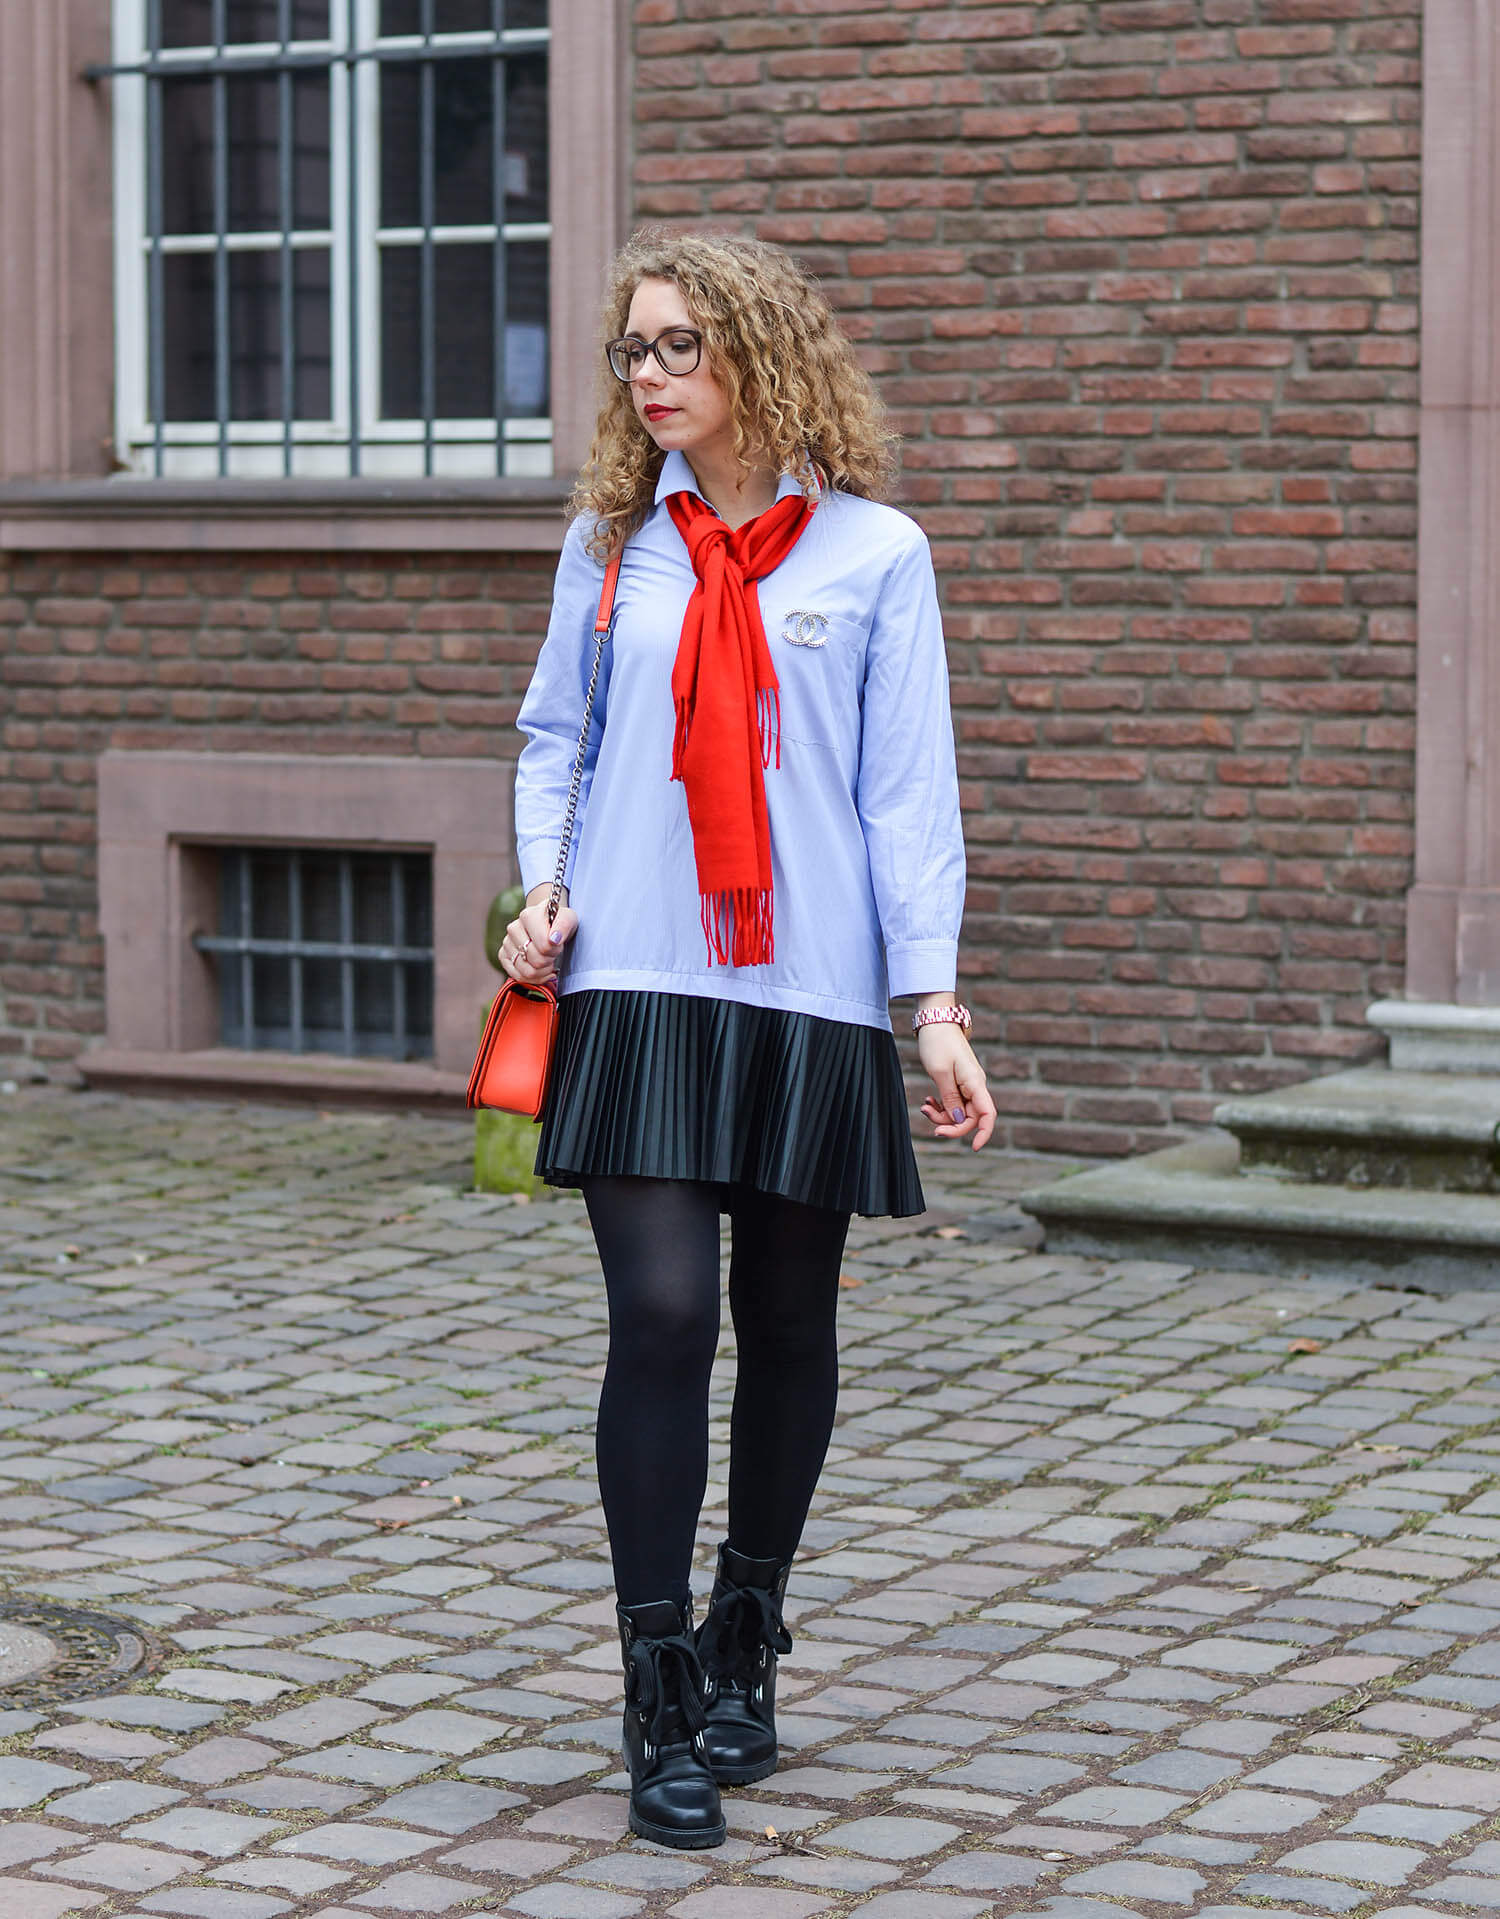 Outfit-College-Look-a-la-Gossip-Girl-with-Pleats-Blouse-dress-and-Scarf-kationette-fashionblogger-nrw-streetstyle